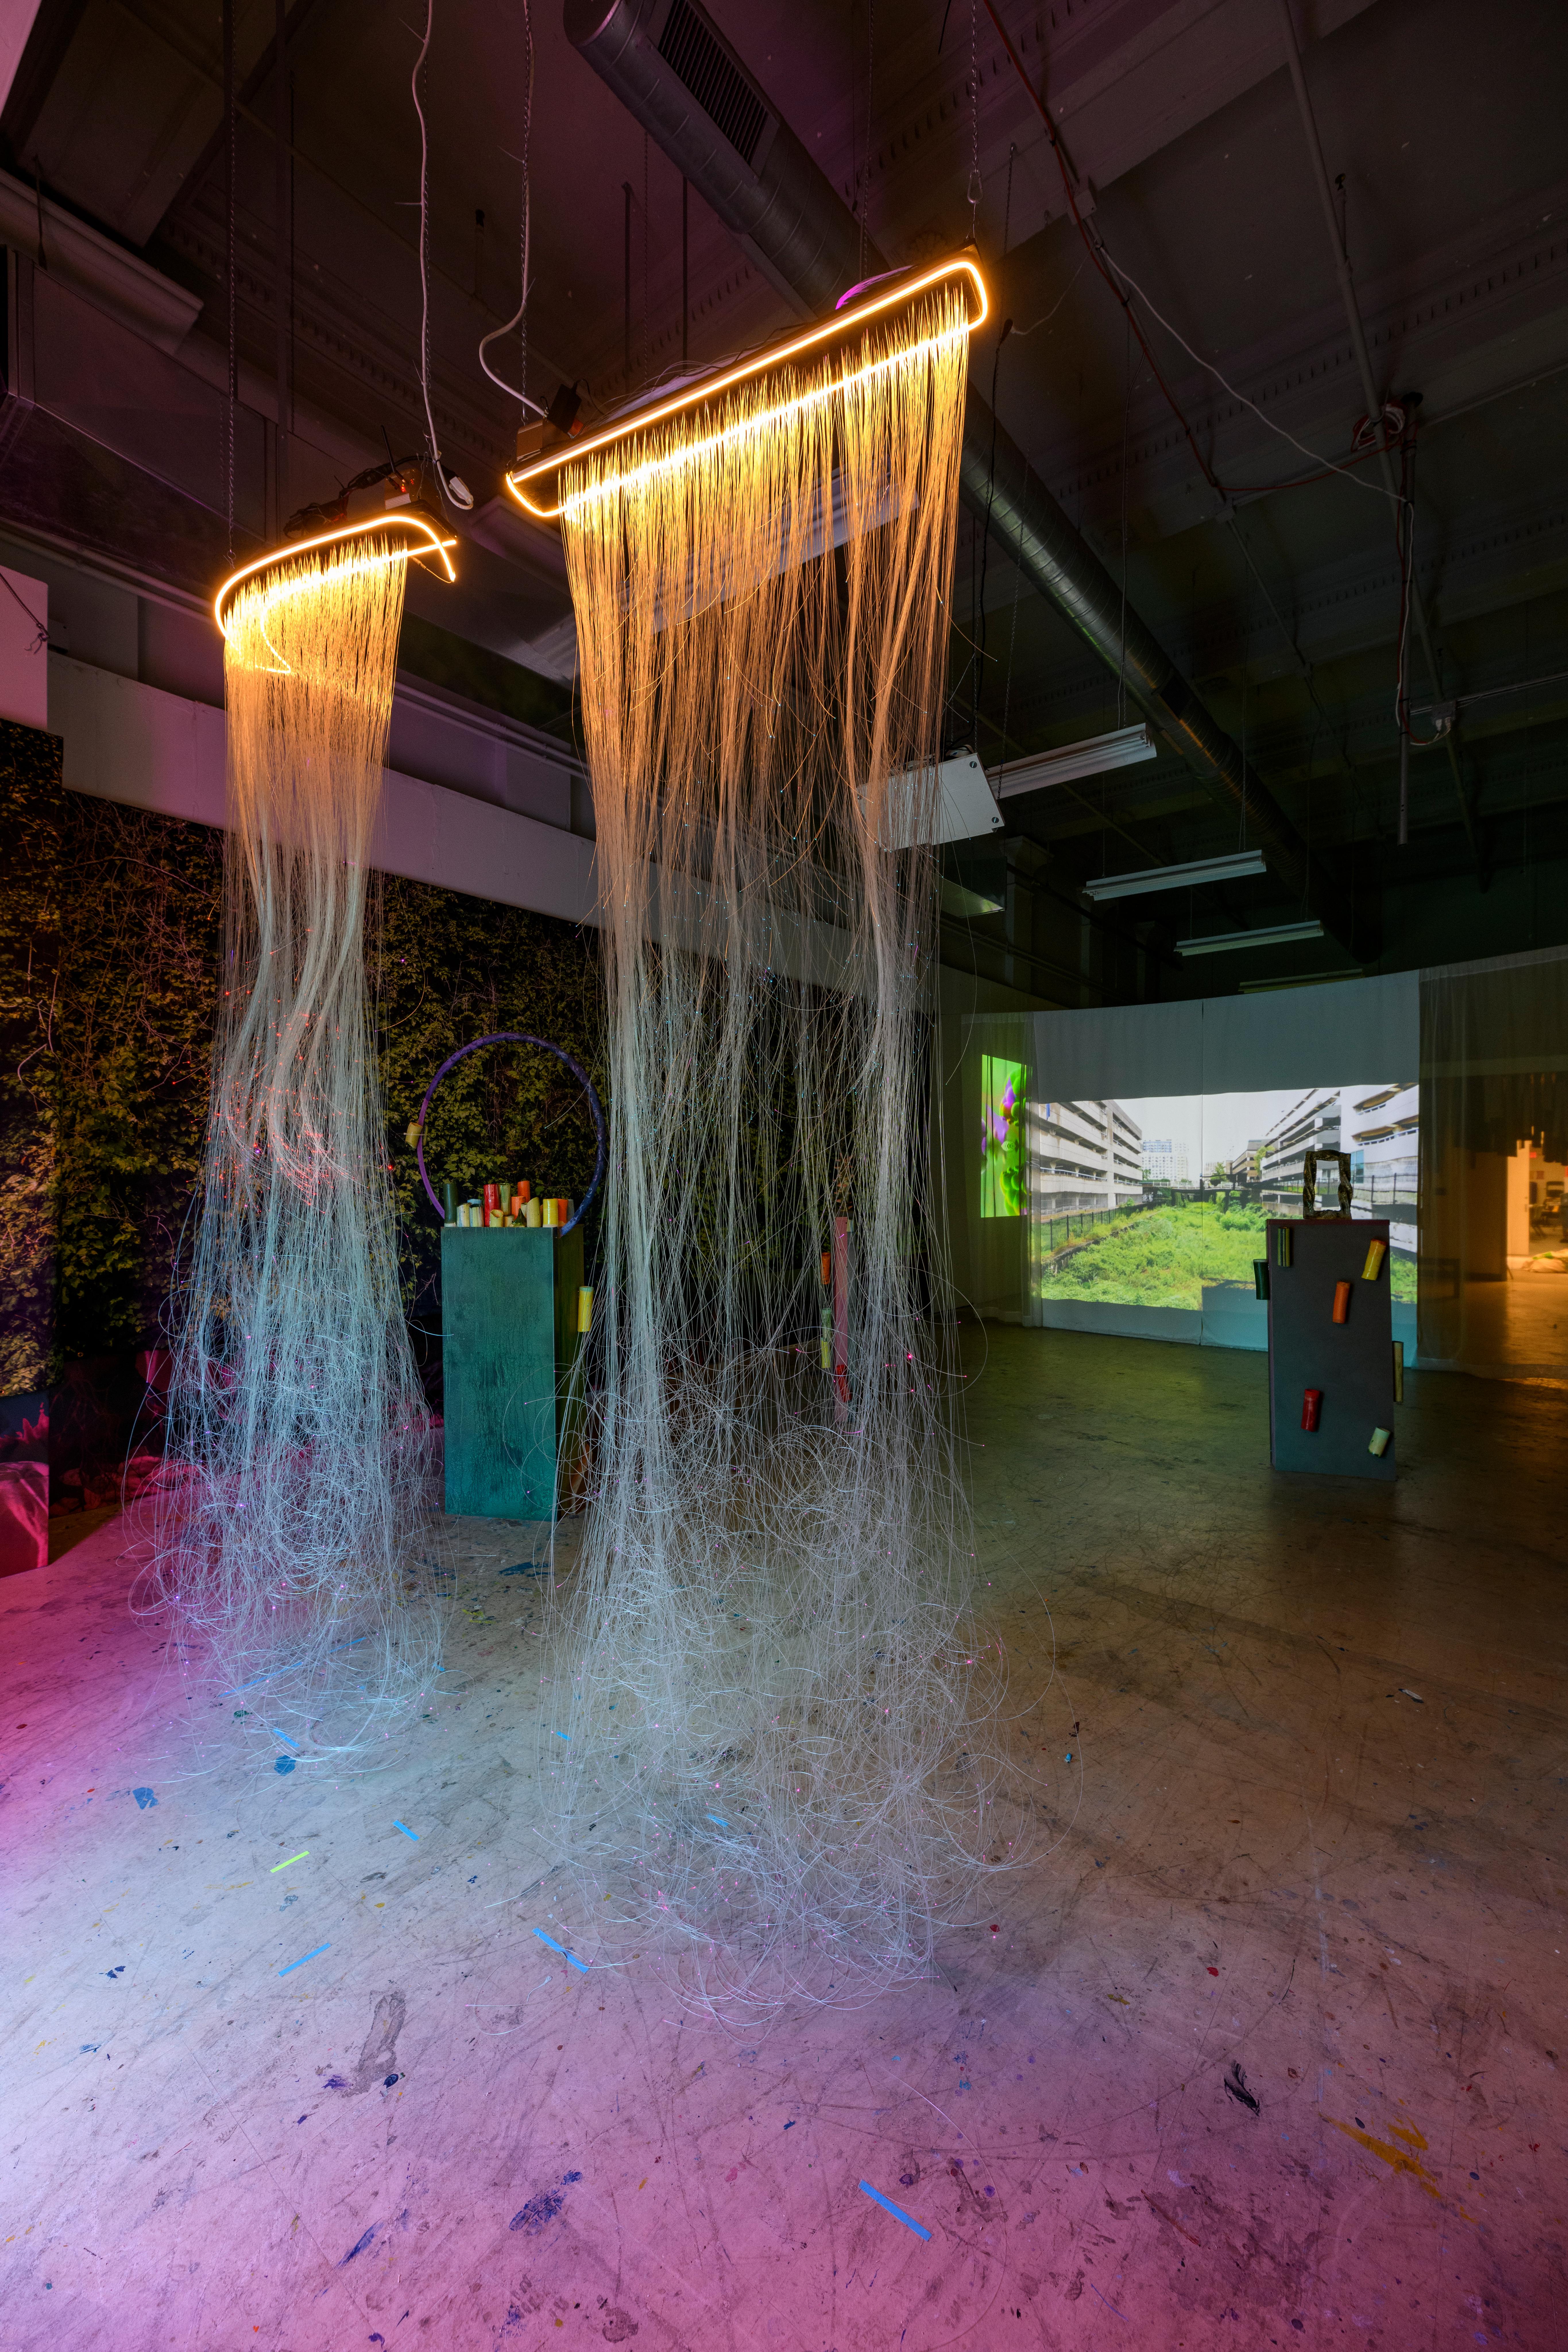 Photo by Constance Mensh. A view of a gallery with multiple sculptural installations and video projection in the back. A piece with plastic strings hang in the foreground lit with LEDs at the top.